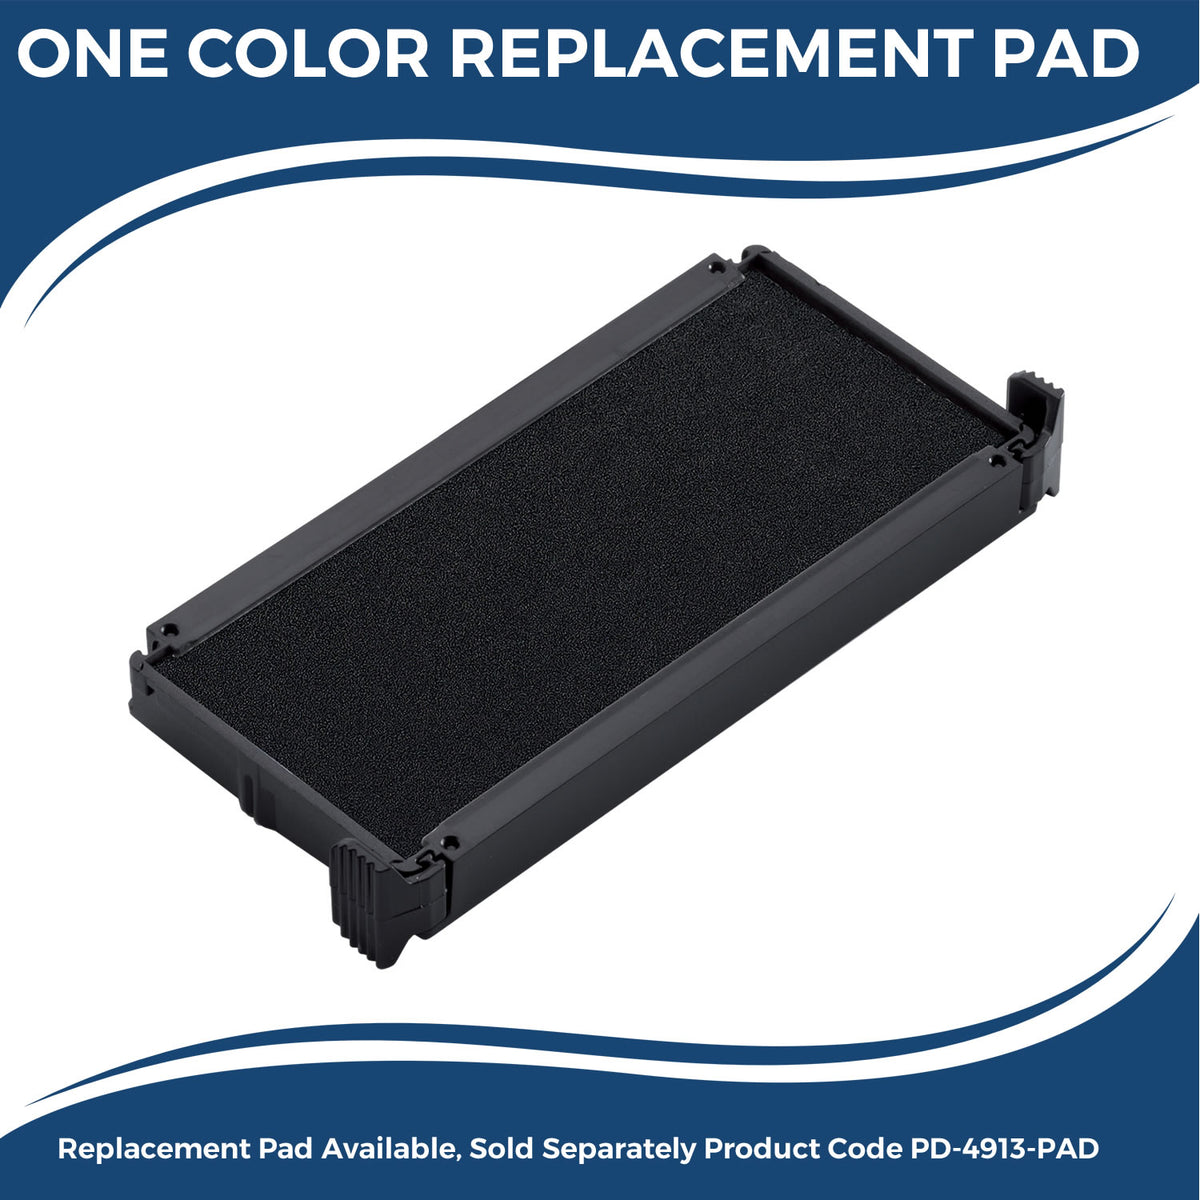 Large Self-Inking Bold Physical Due Stamp 4953S Large Replacment Pad